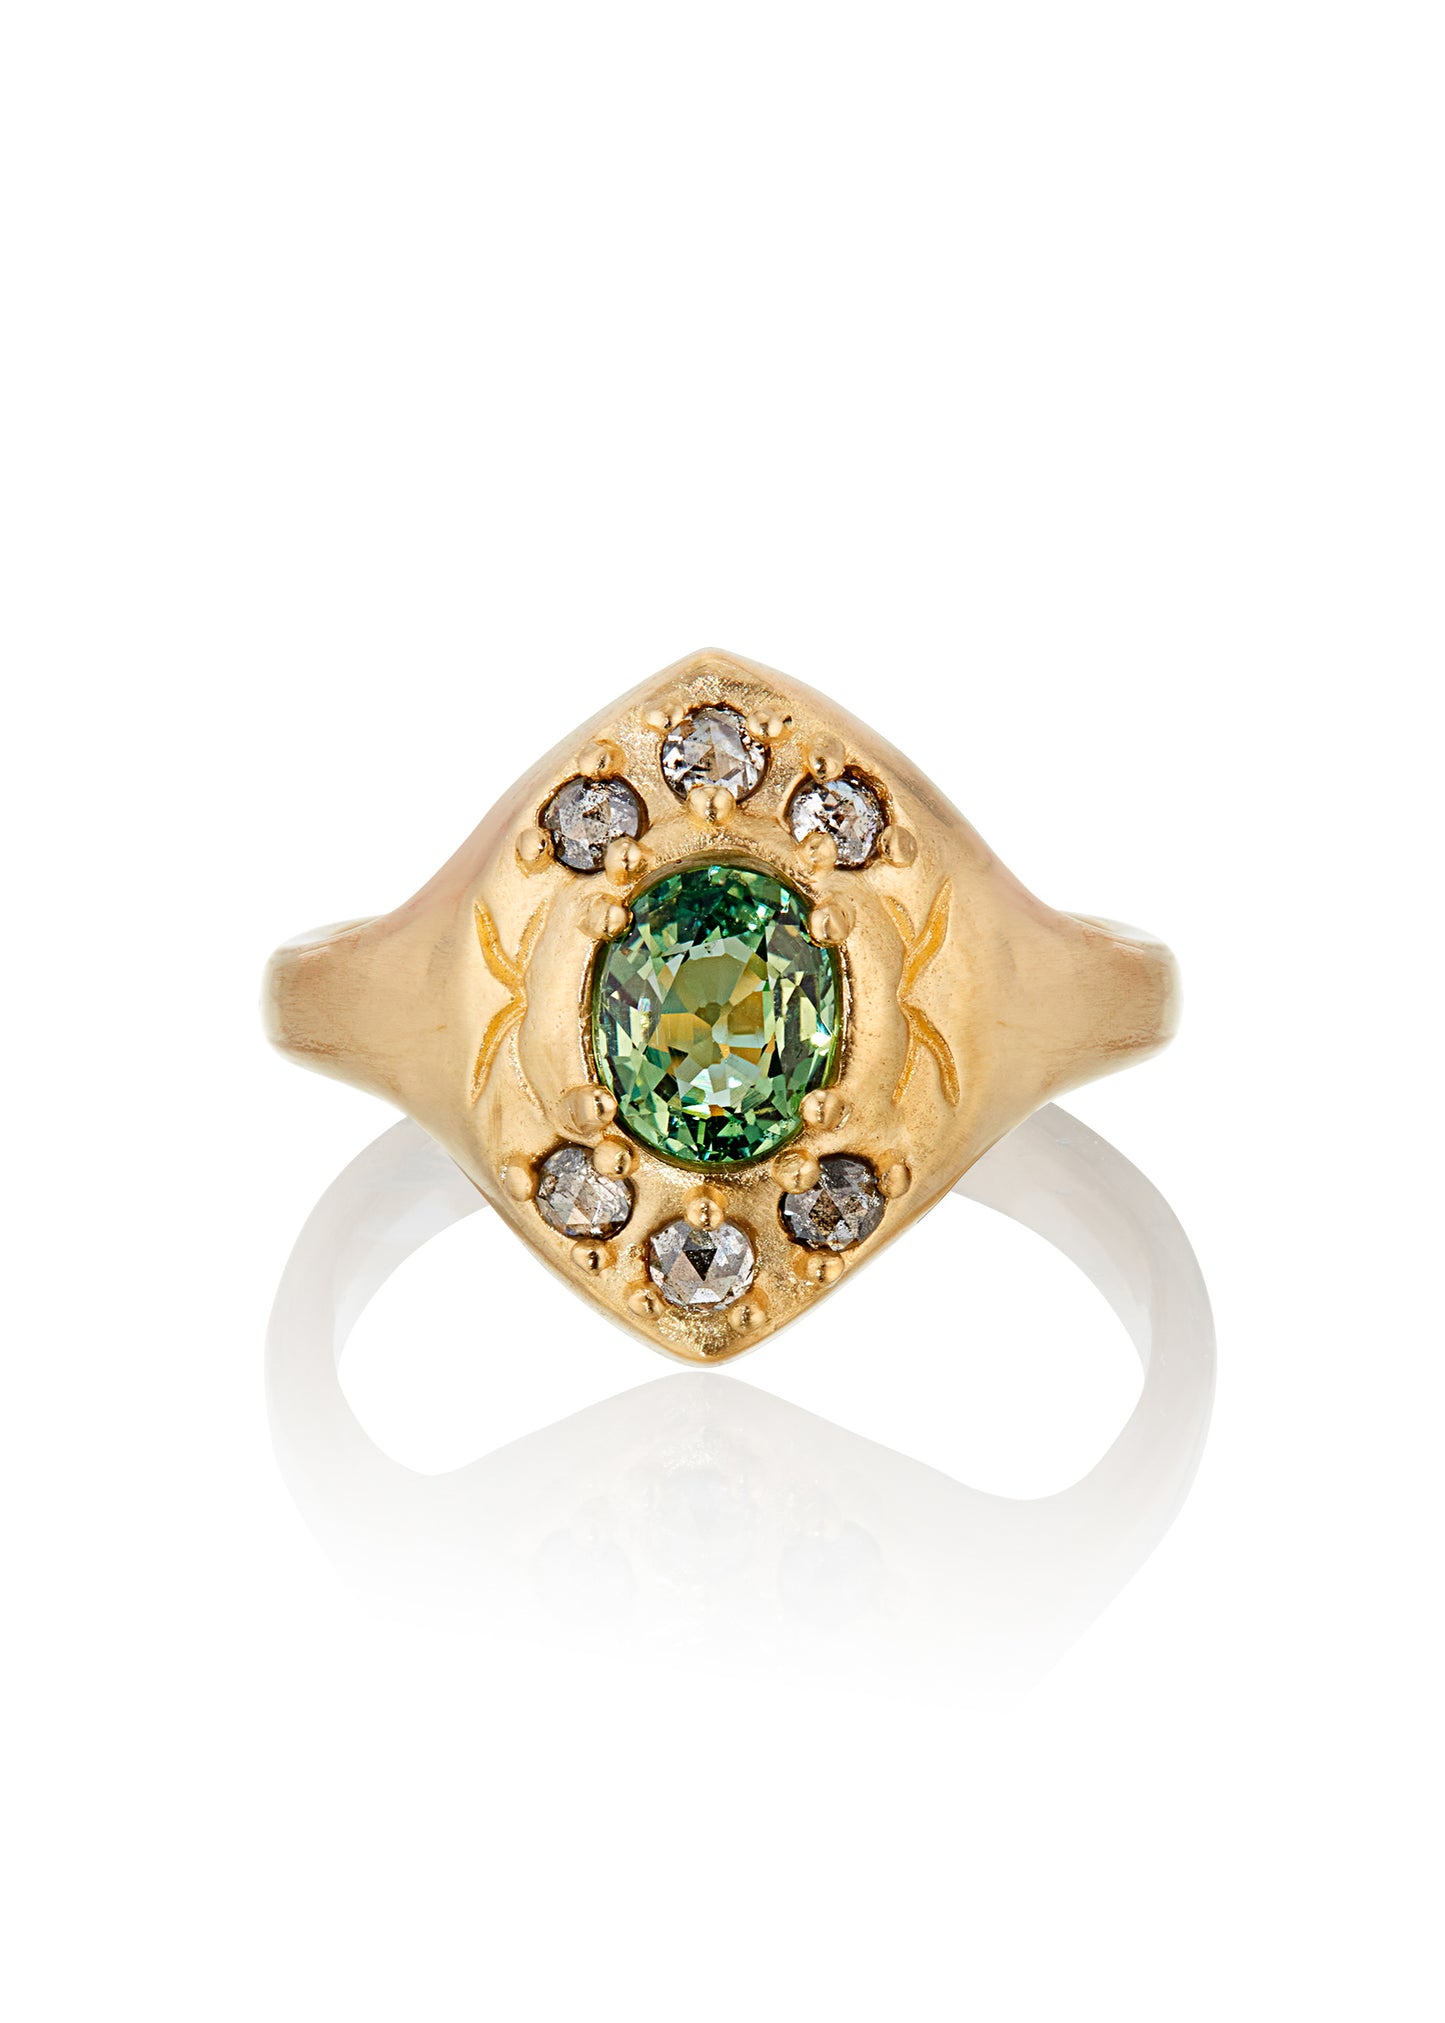 A resplendent portal to a bygone era, the Lucent ring borrows inspiration from the Gothic arches of a treasured riverside cathedral. Aligned to highlight the points of the arches, rose cut diamonds and a breathtaking green sapphire appear lit from within, like sunlight streaming through stained glass. A masterful, timeless piece of jewelry.